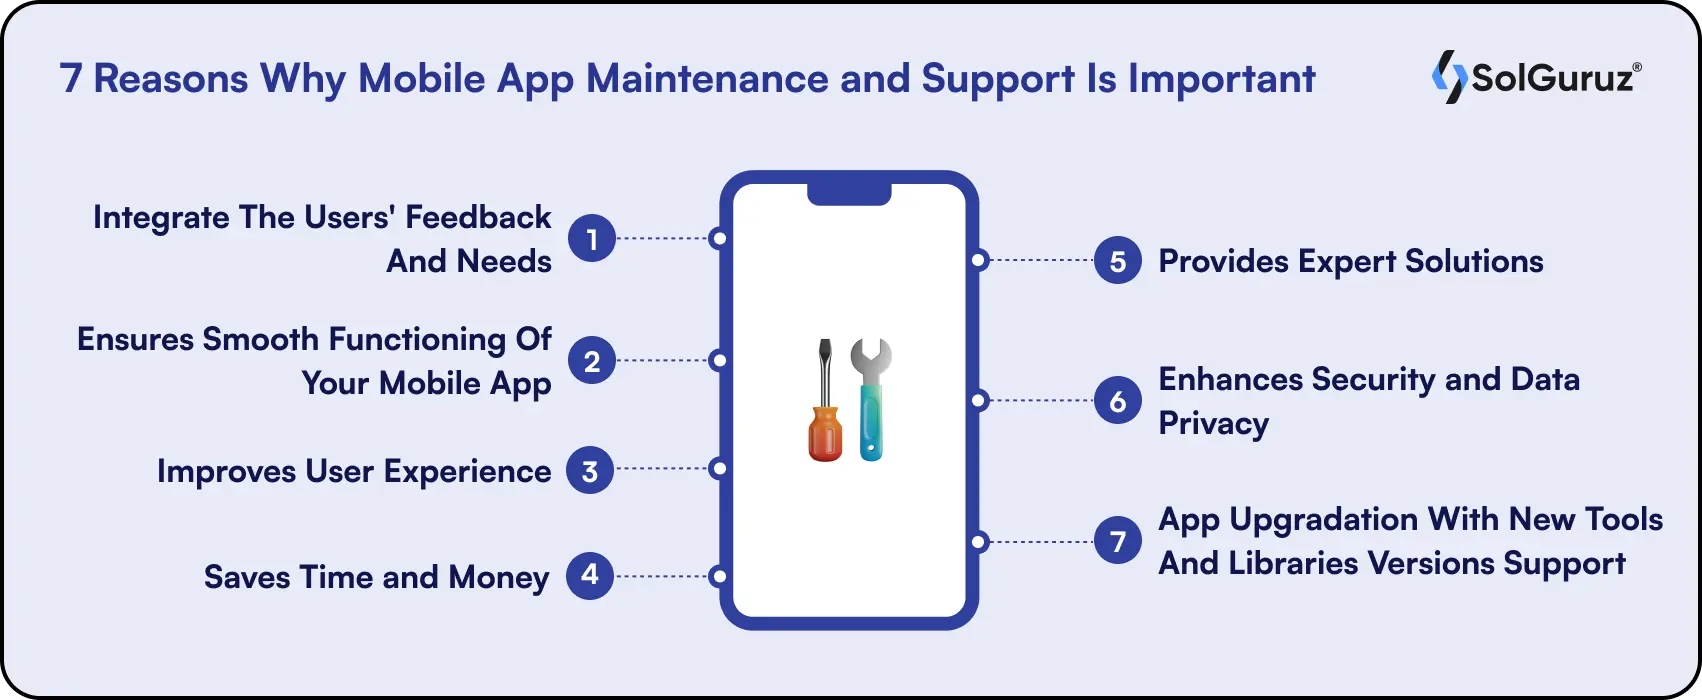 7 Reasons Why Mobile App Maintenance and Support Is Important